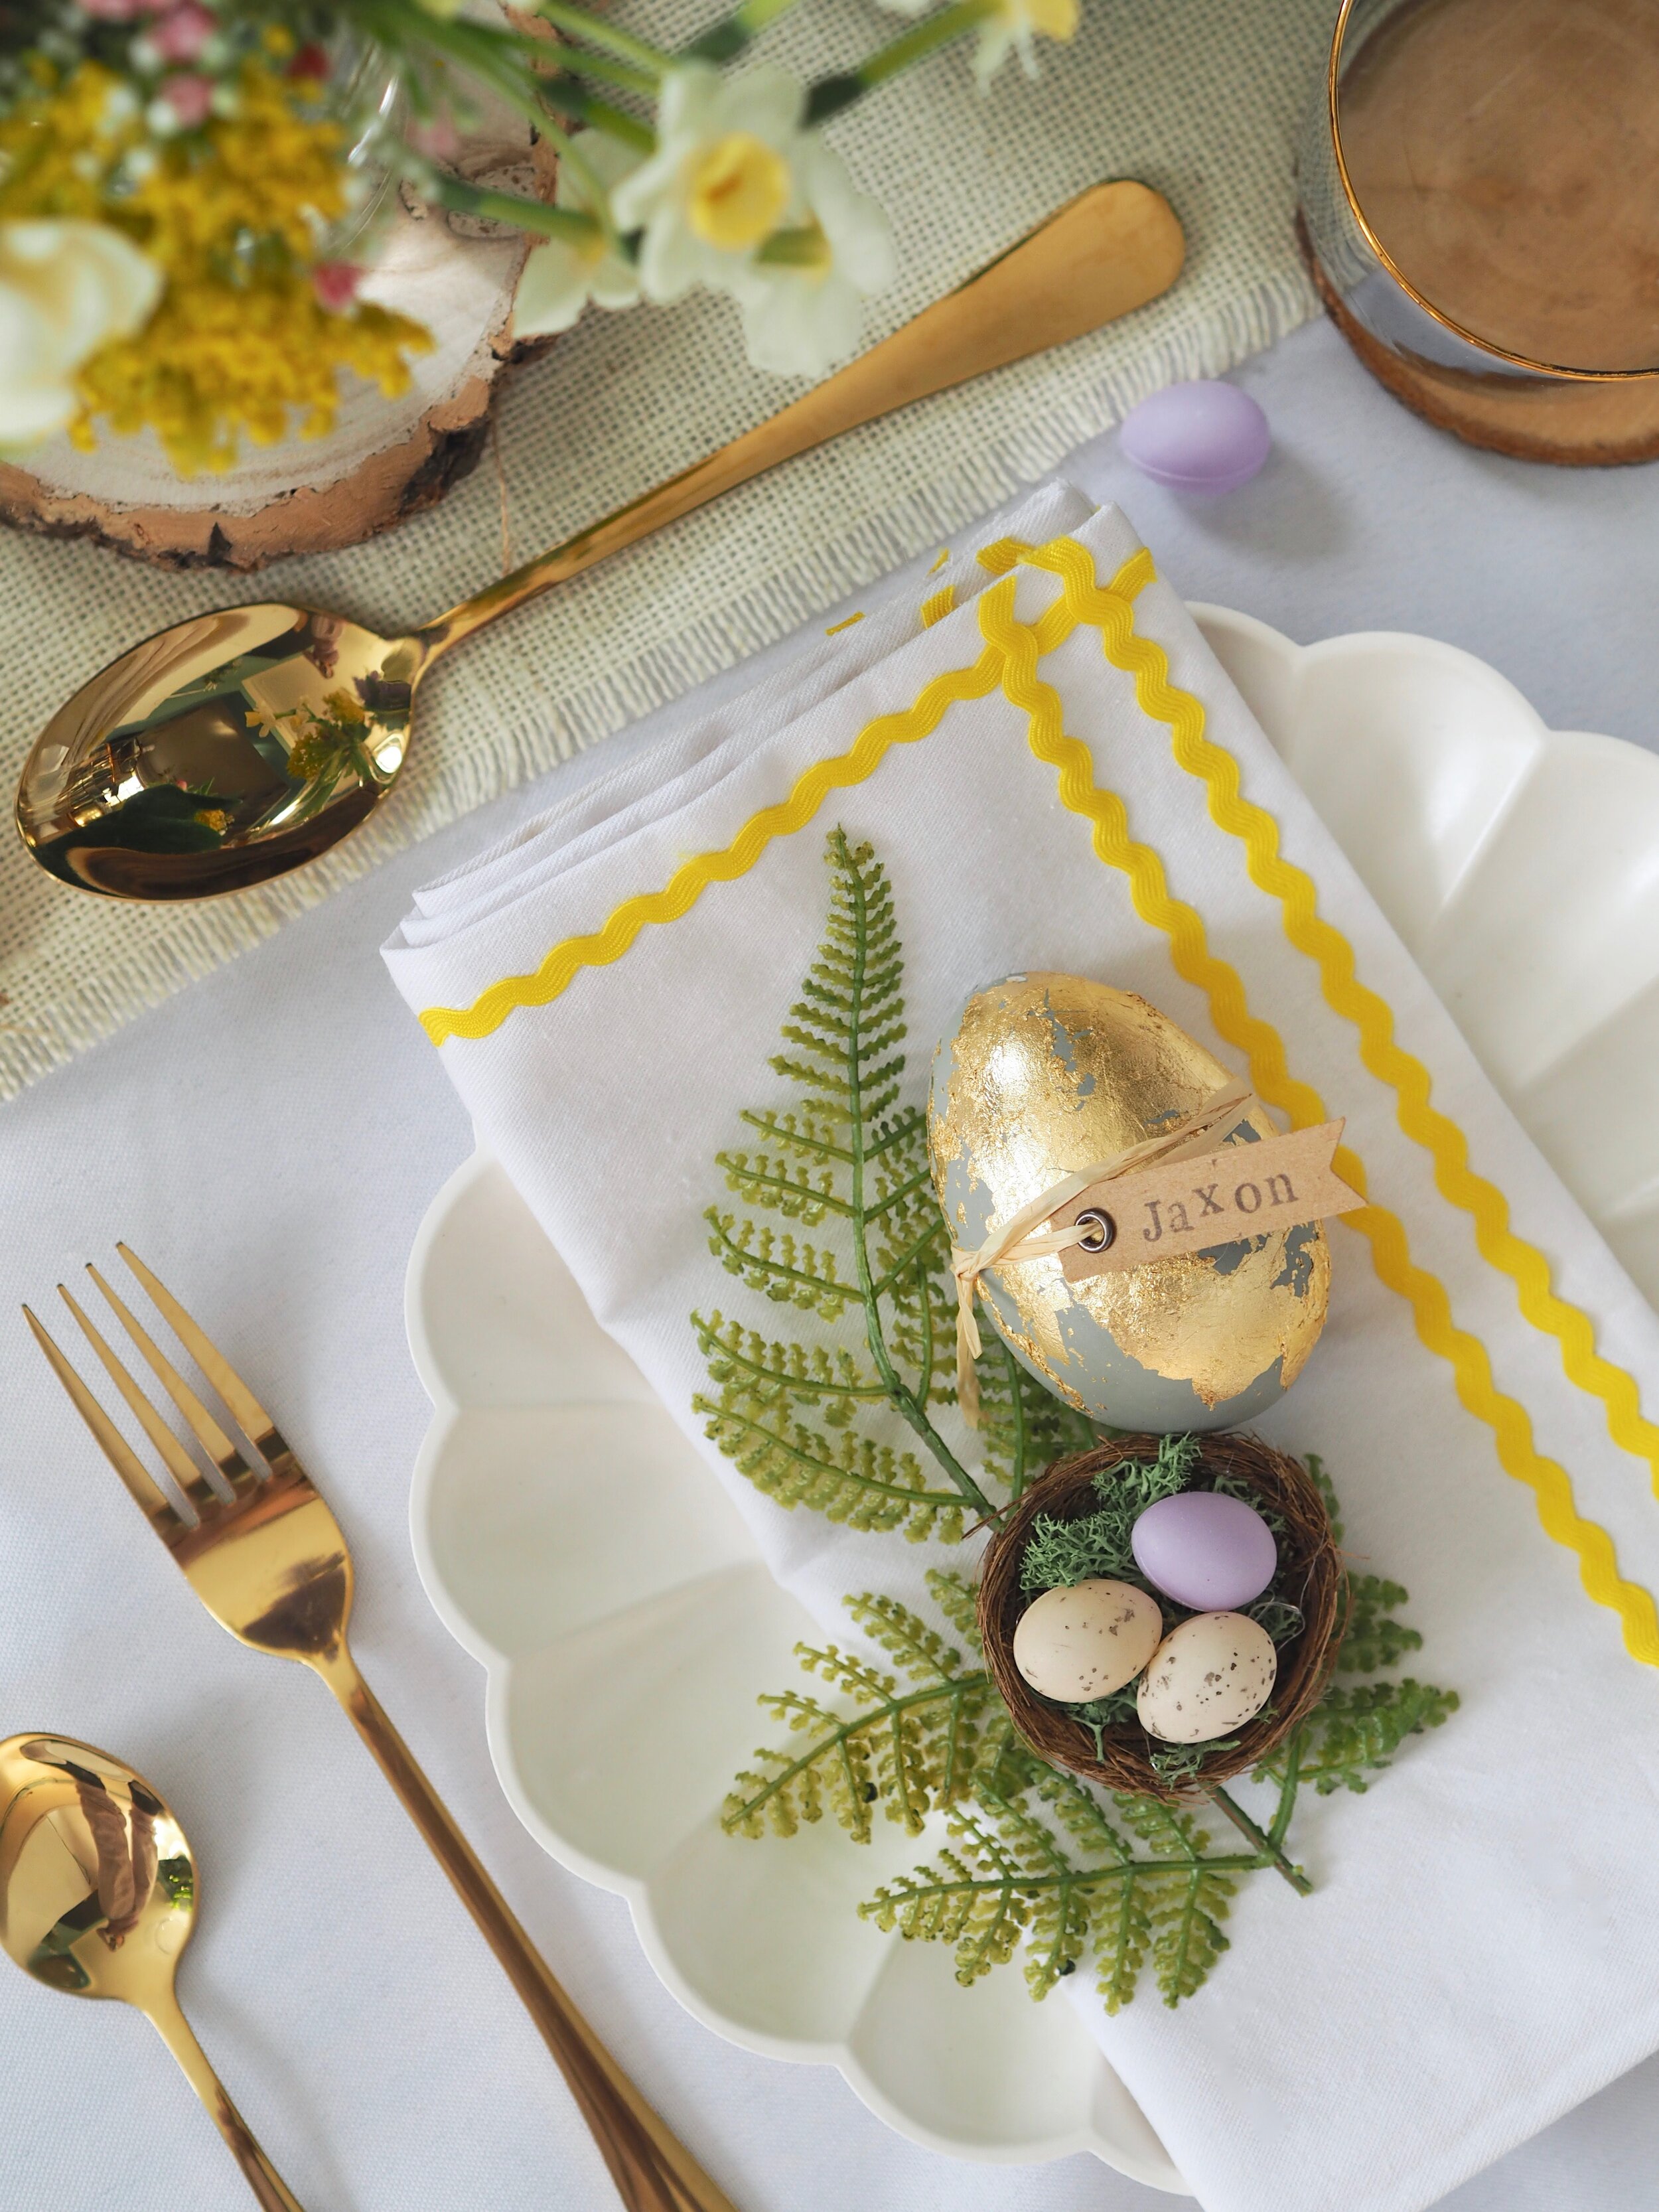 Easter Table Setting Ideas And Decorations — MELANIE LISSACK INTERIORS